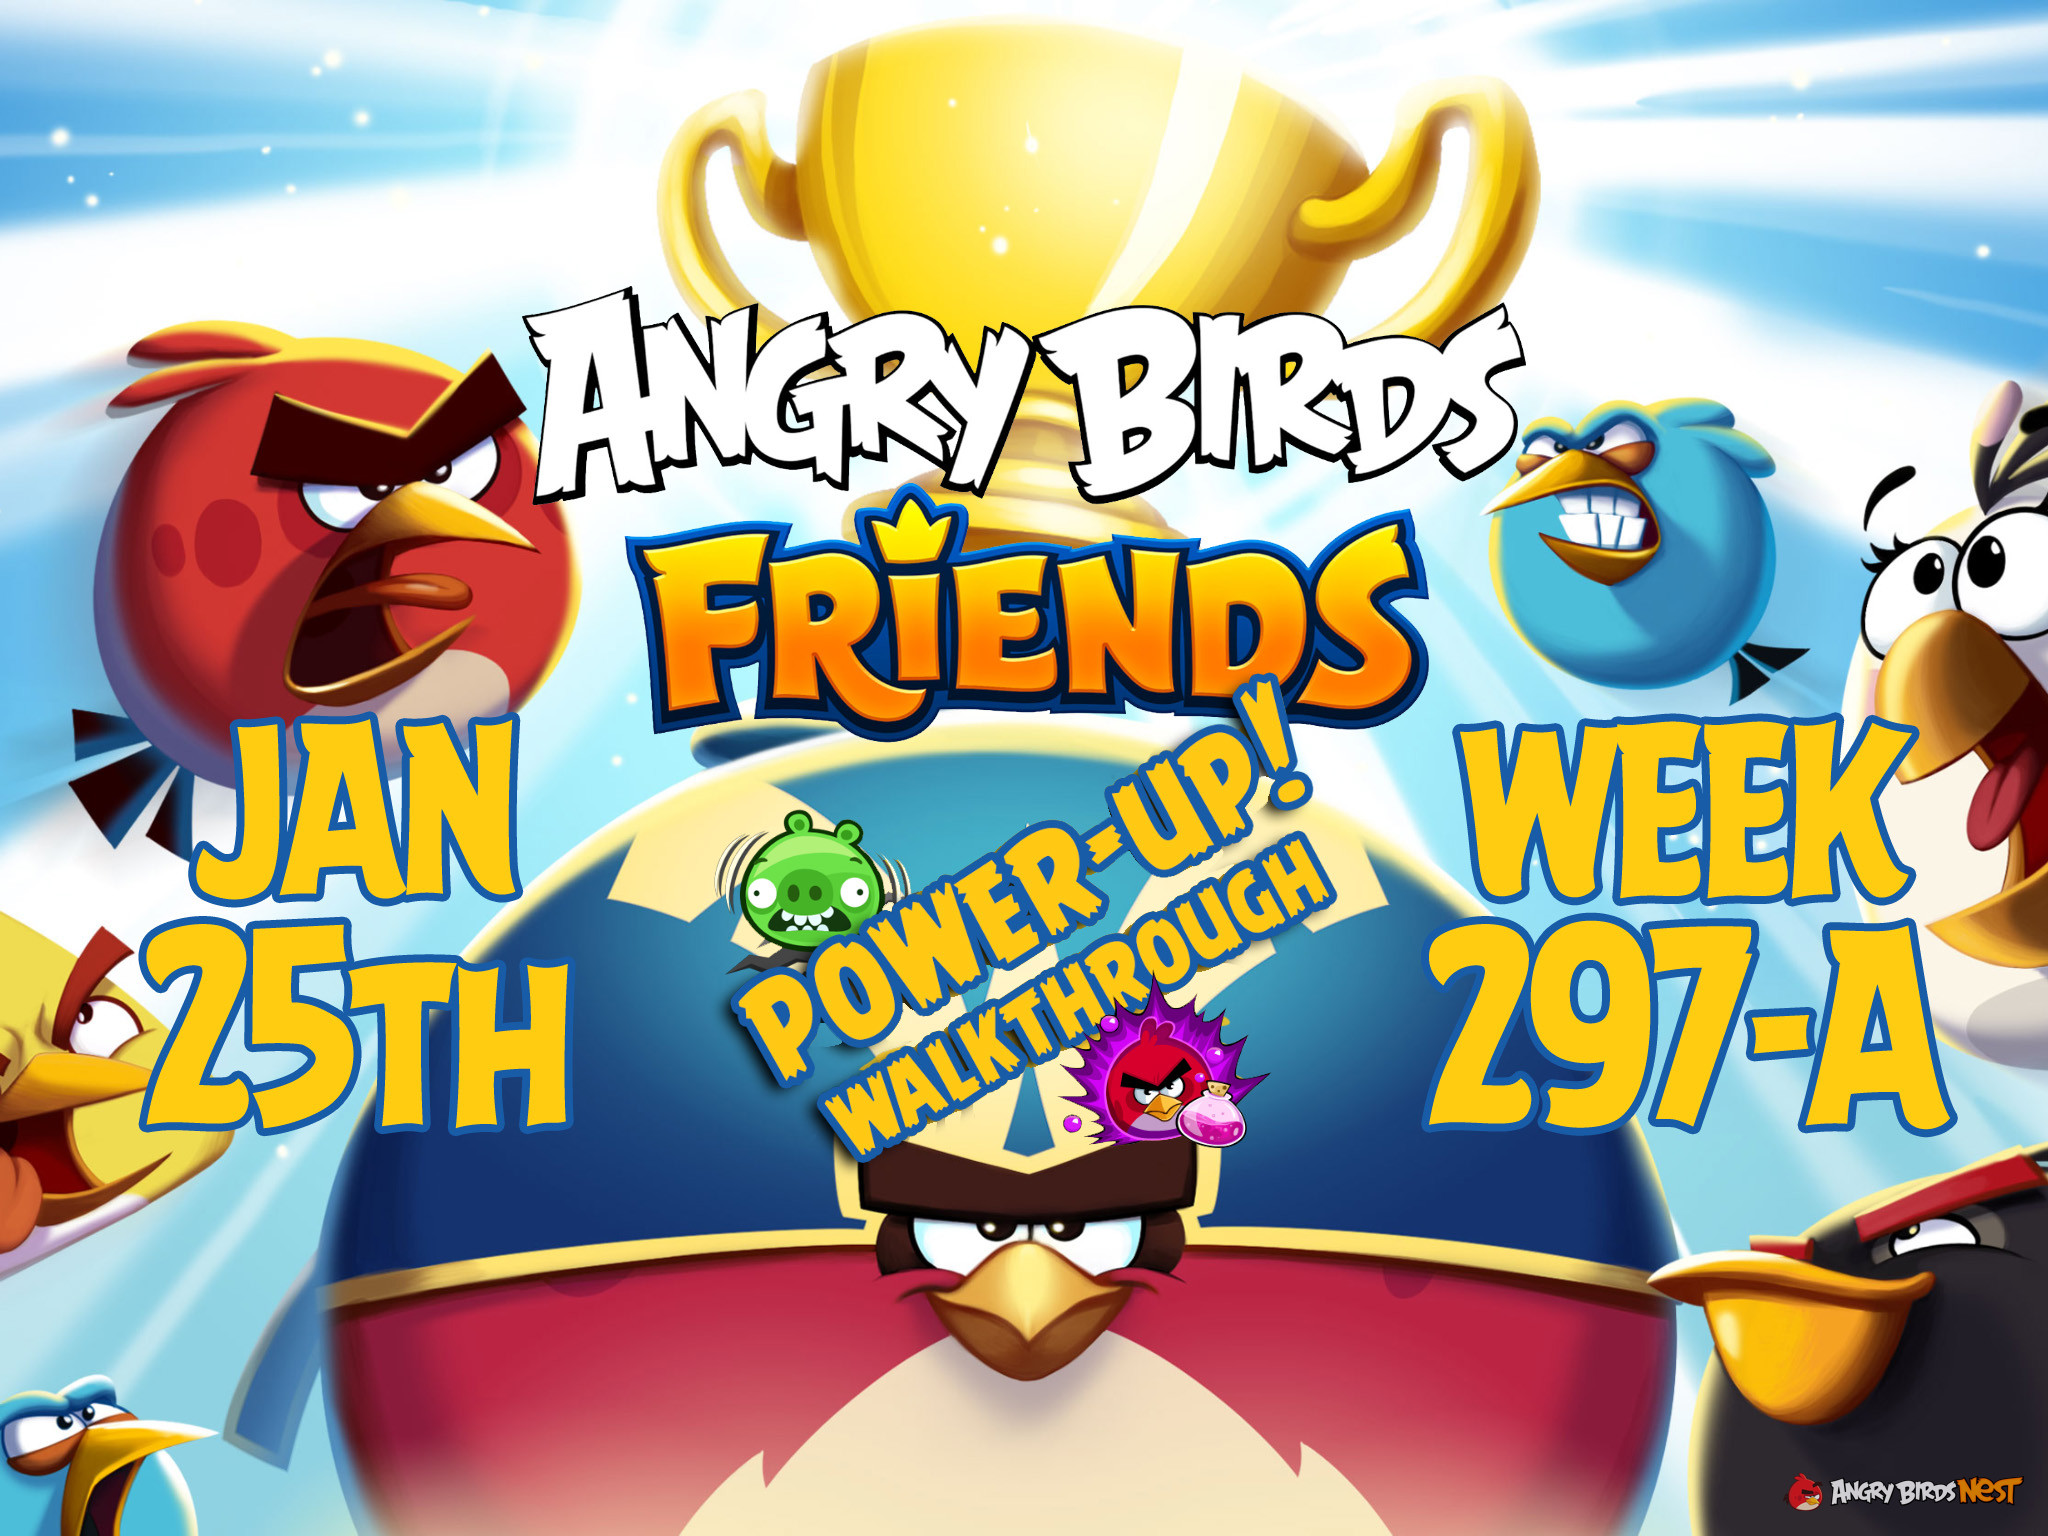 Angry Birds Friends Tournament Week 297-A Feature Image PU